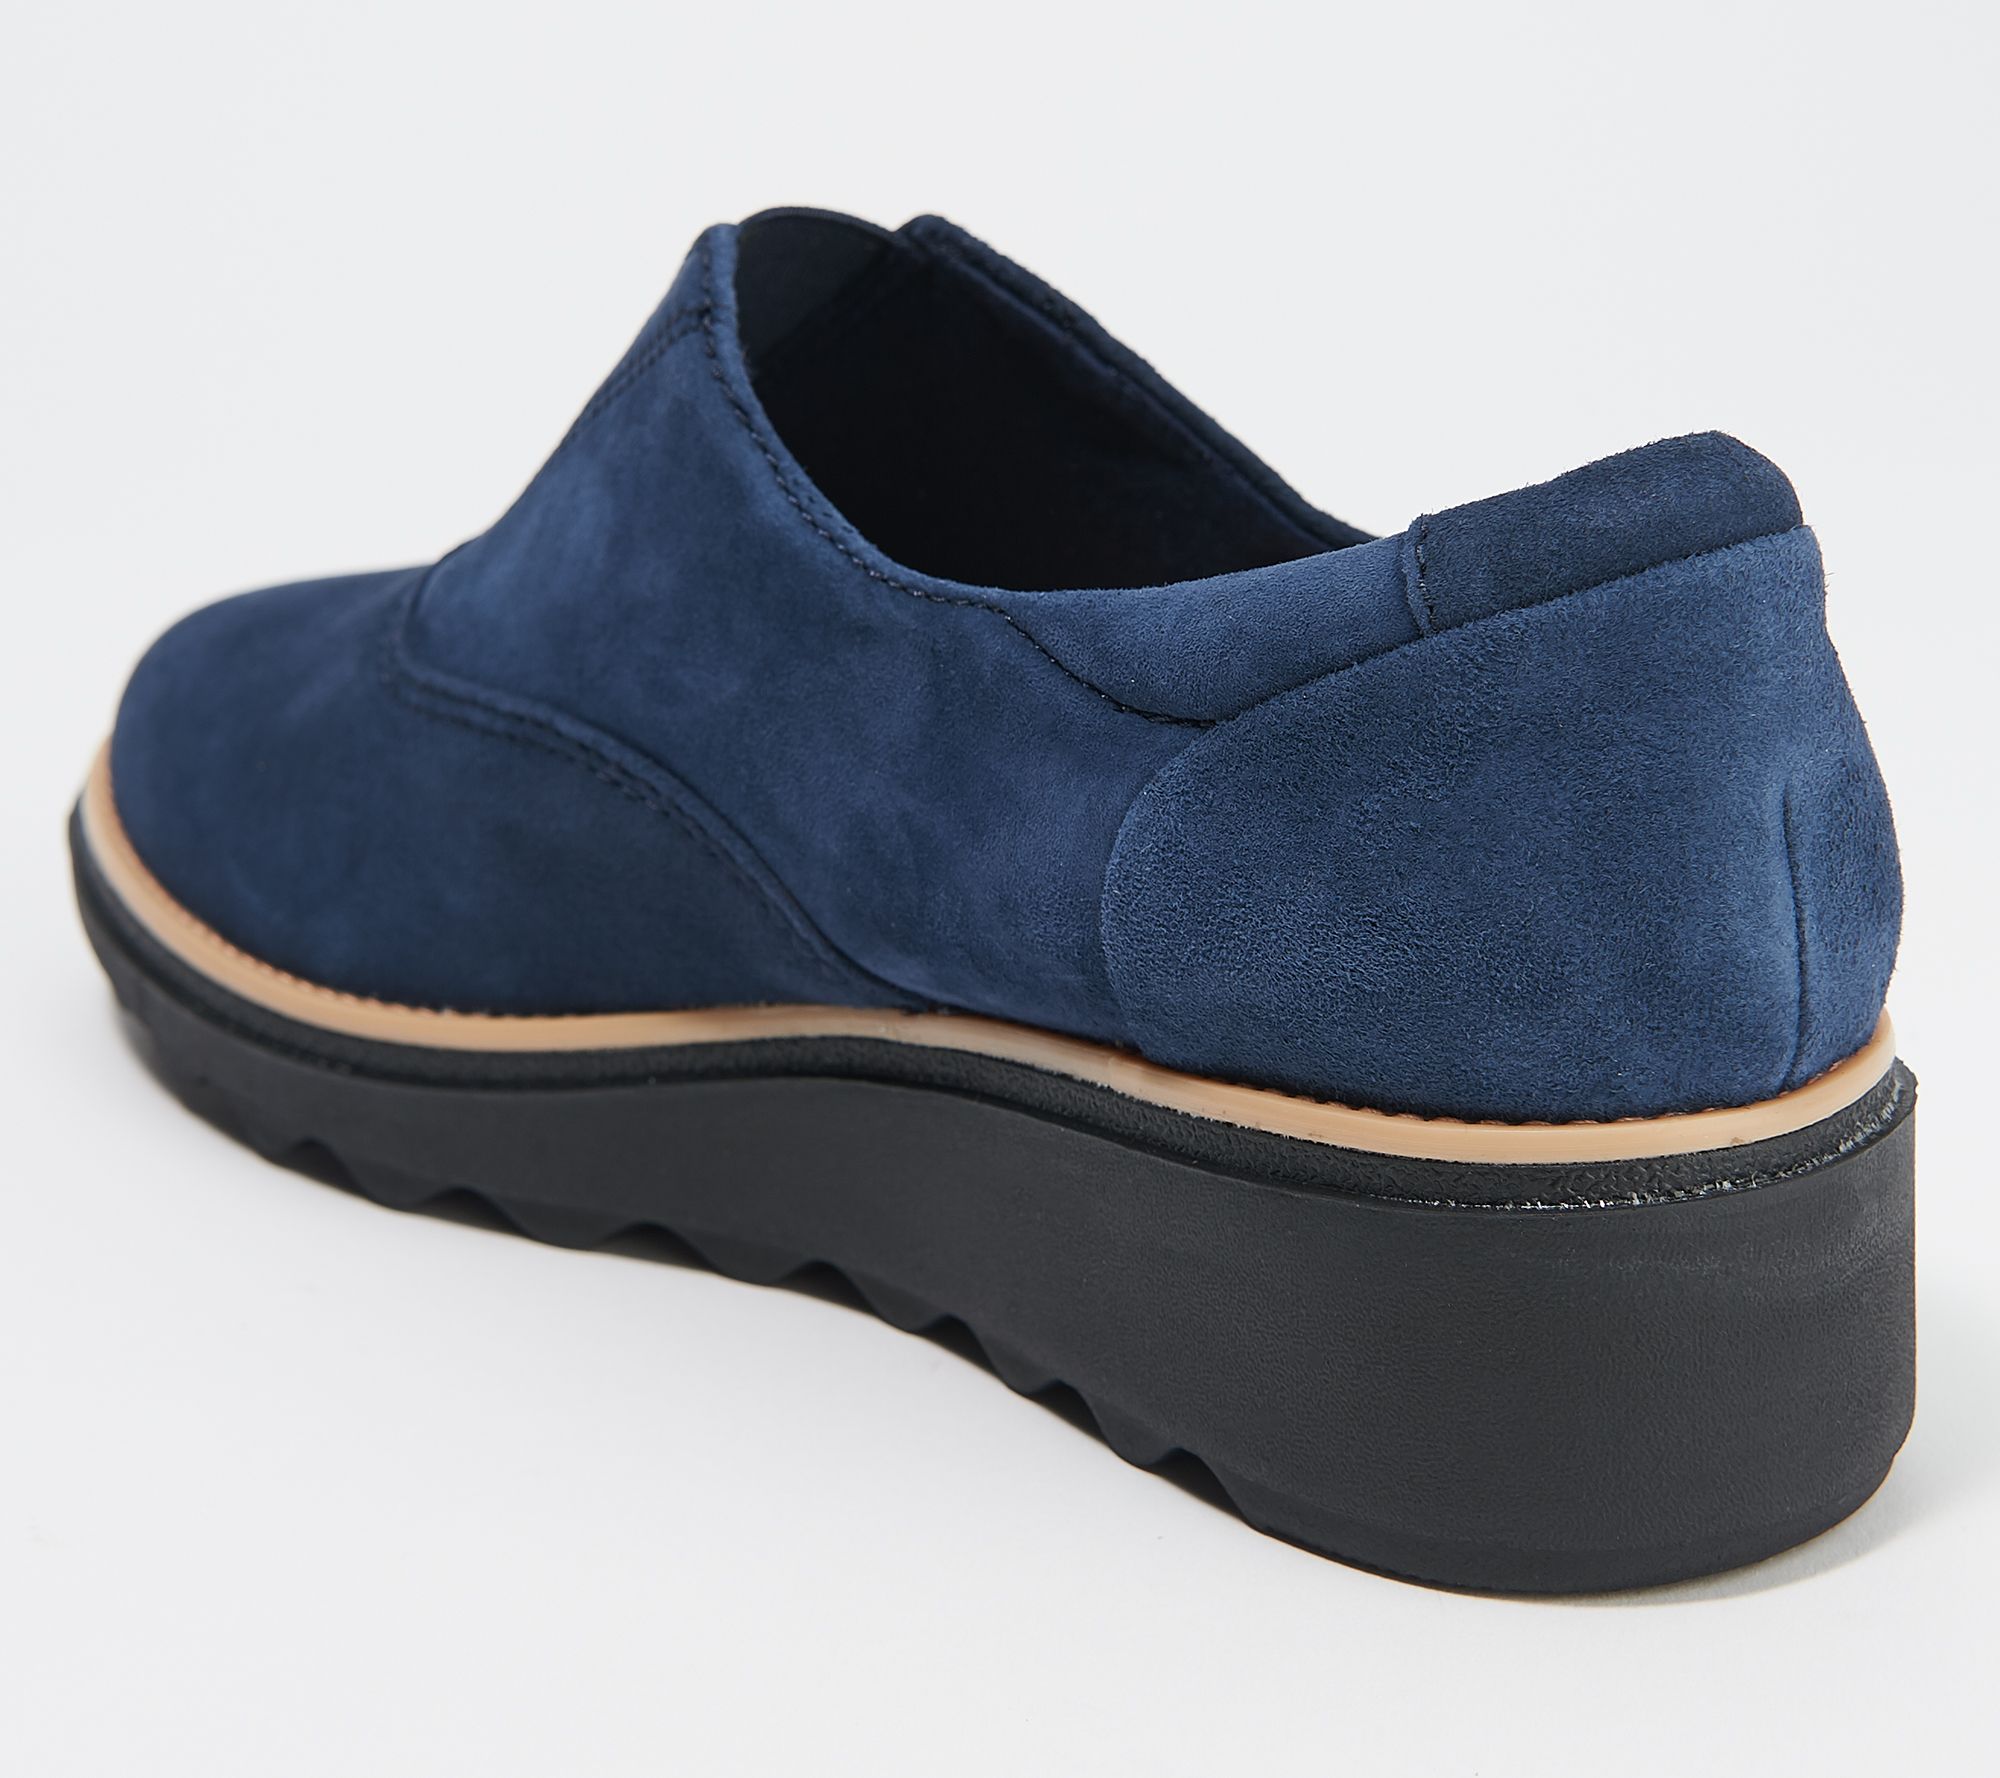 Clarks Collection Suede Slip-On Shoes 